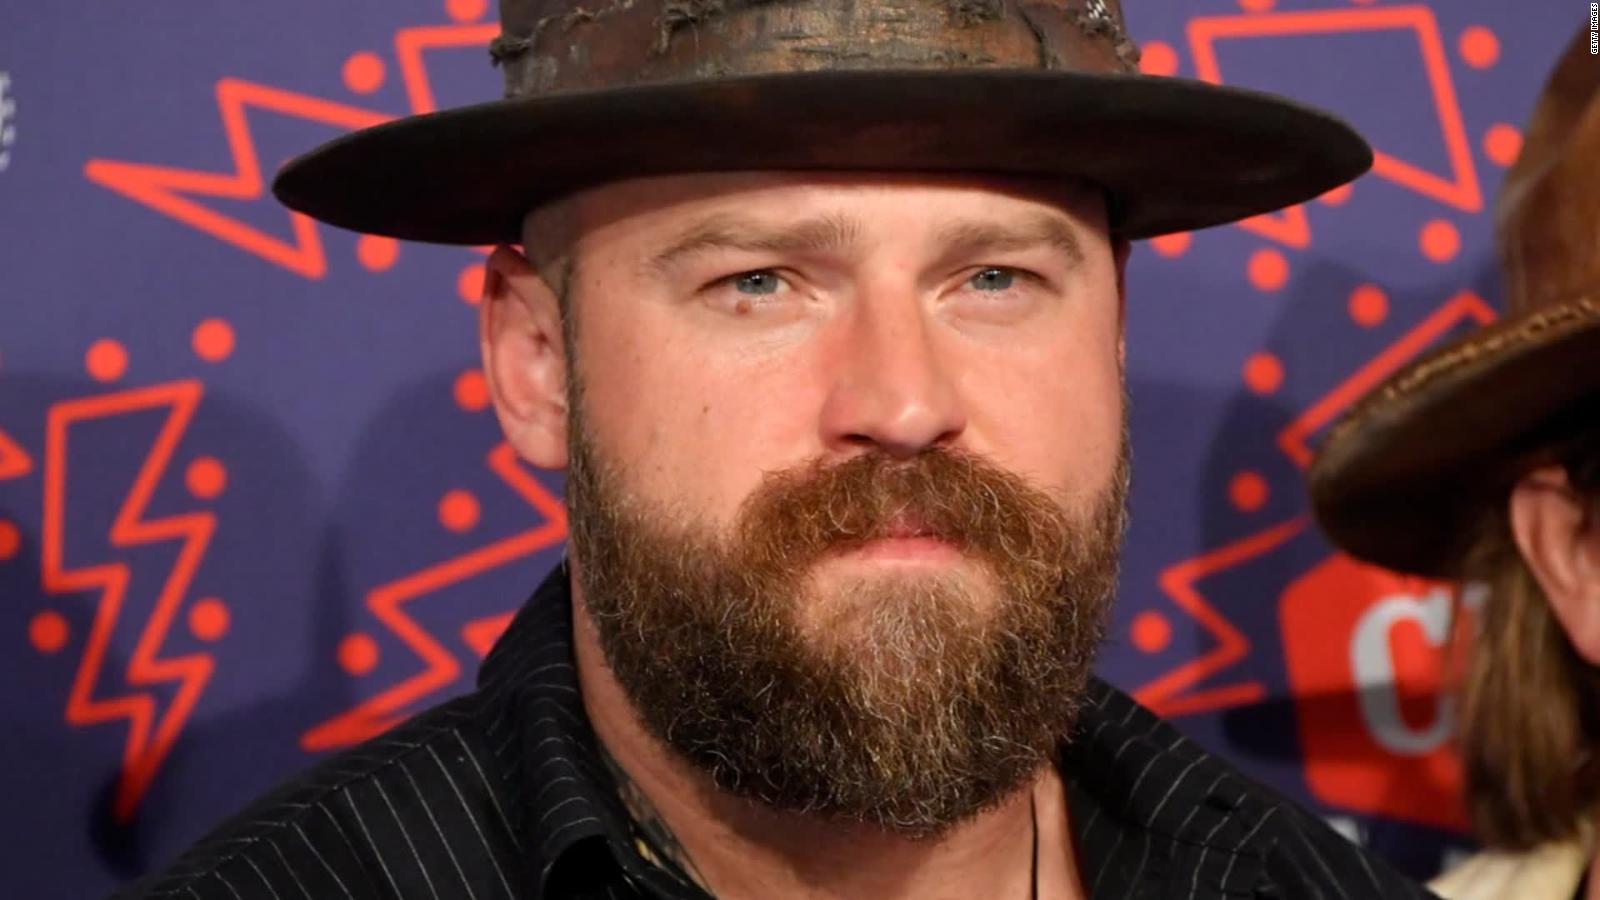 Zac Brown tests positive for Covid, cancels concerts CNN